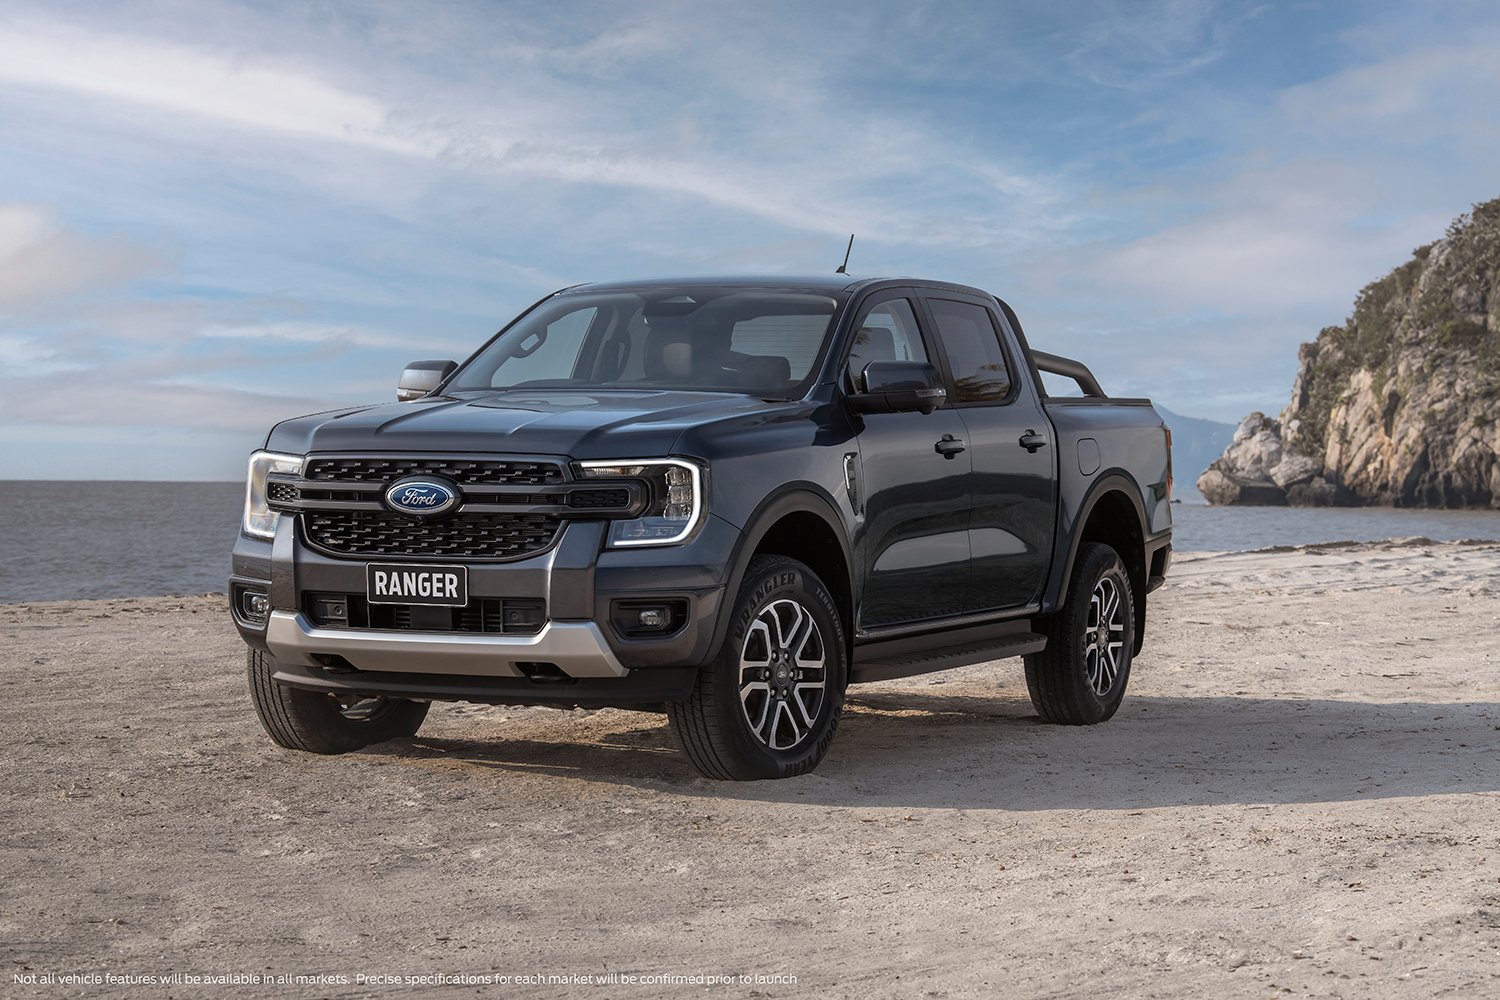 Ford Ranger specifications